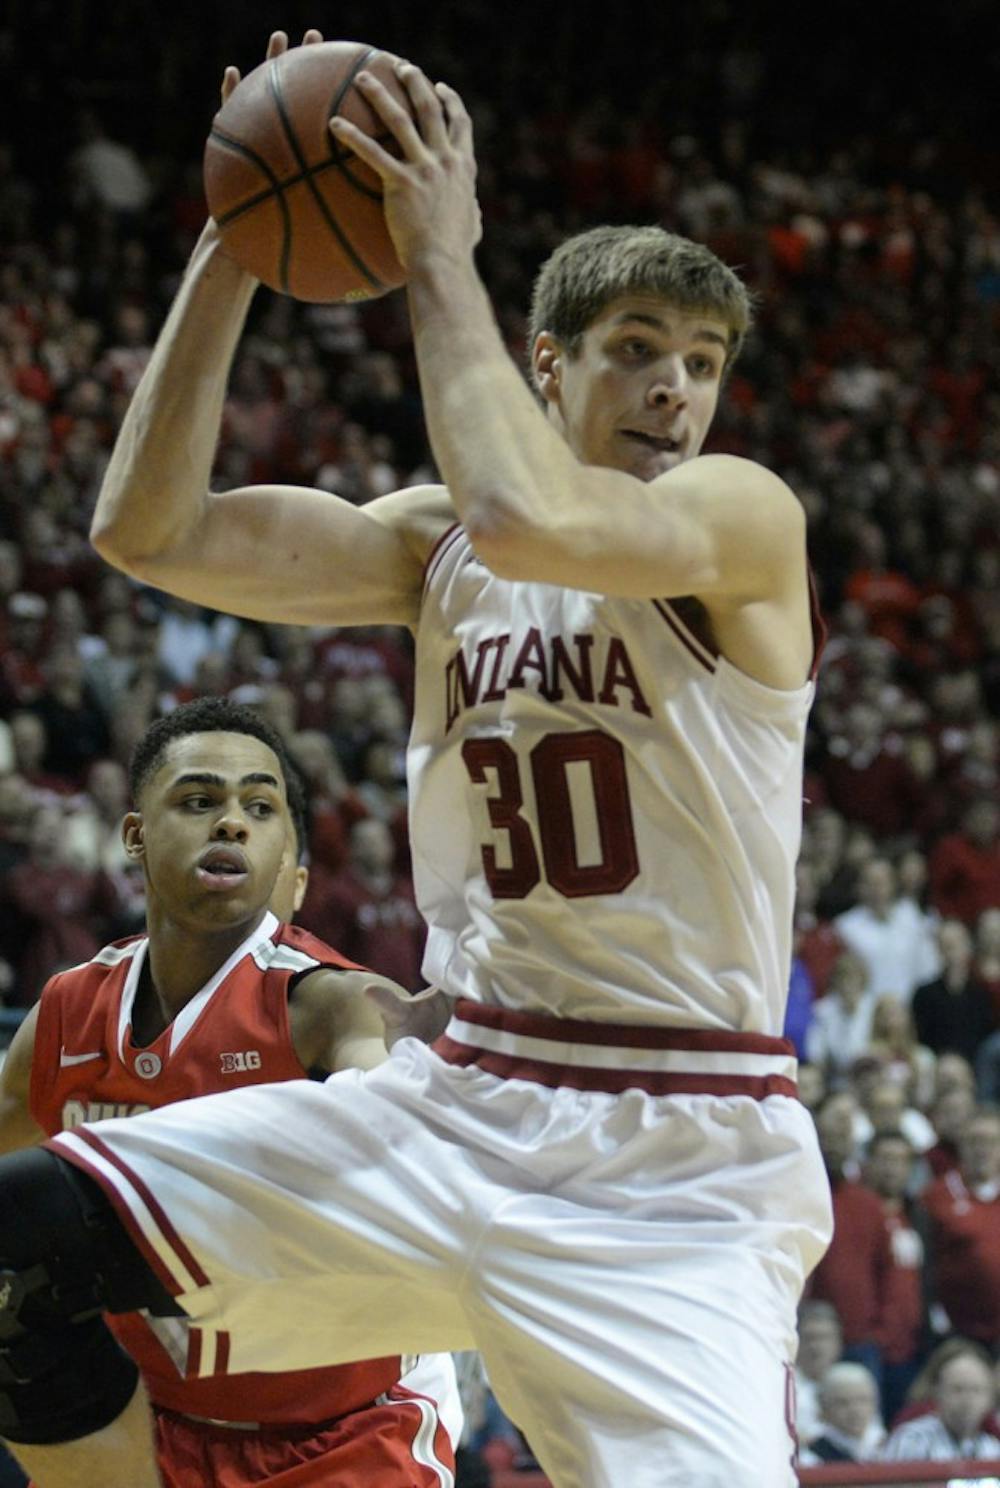 Sophomore Collin Hartman grabs a rebound late in IU's game against Ohio State on Saturday at Assembly Hall.